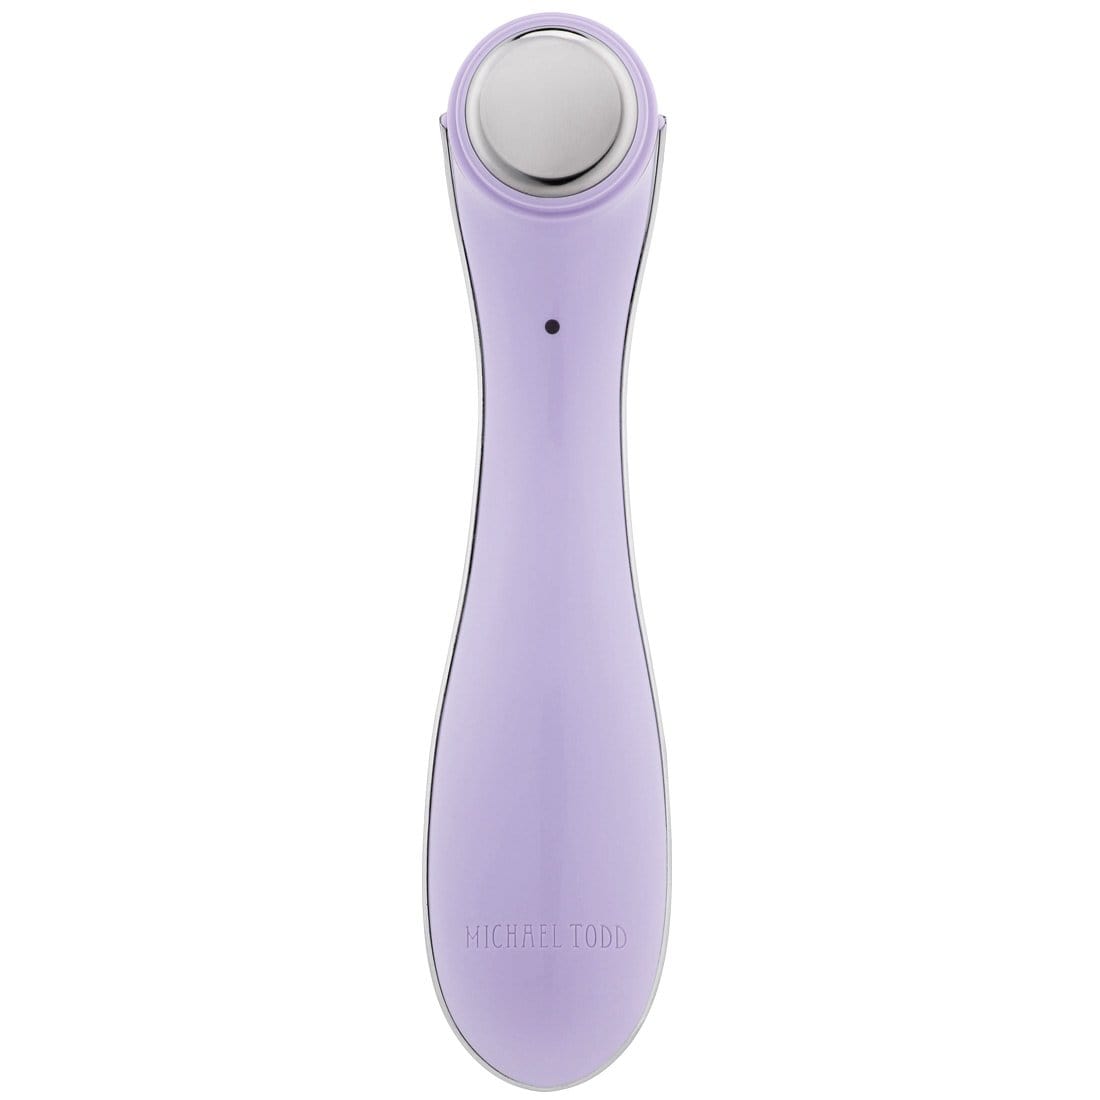 A purple Stay Balanced device with a round object for skincare delivery system by Michael Todd Beauty.